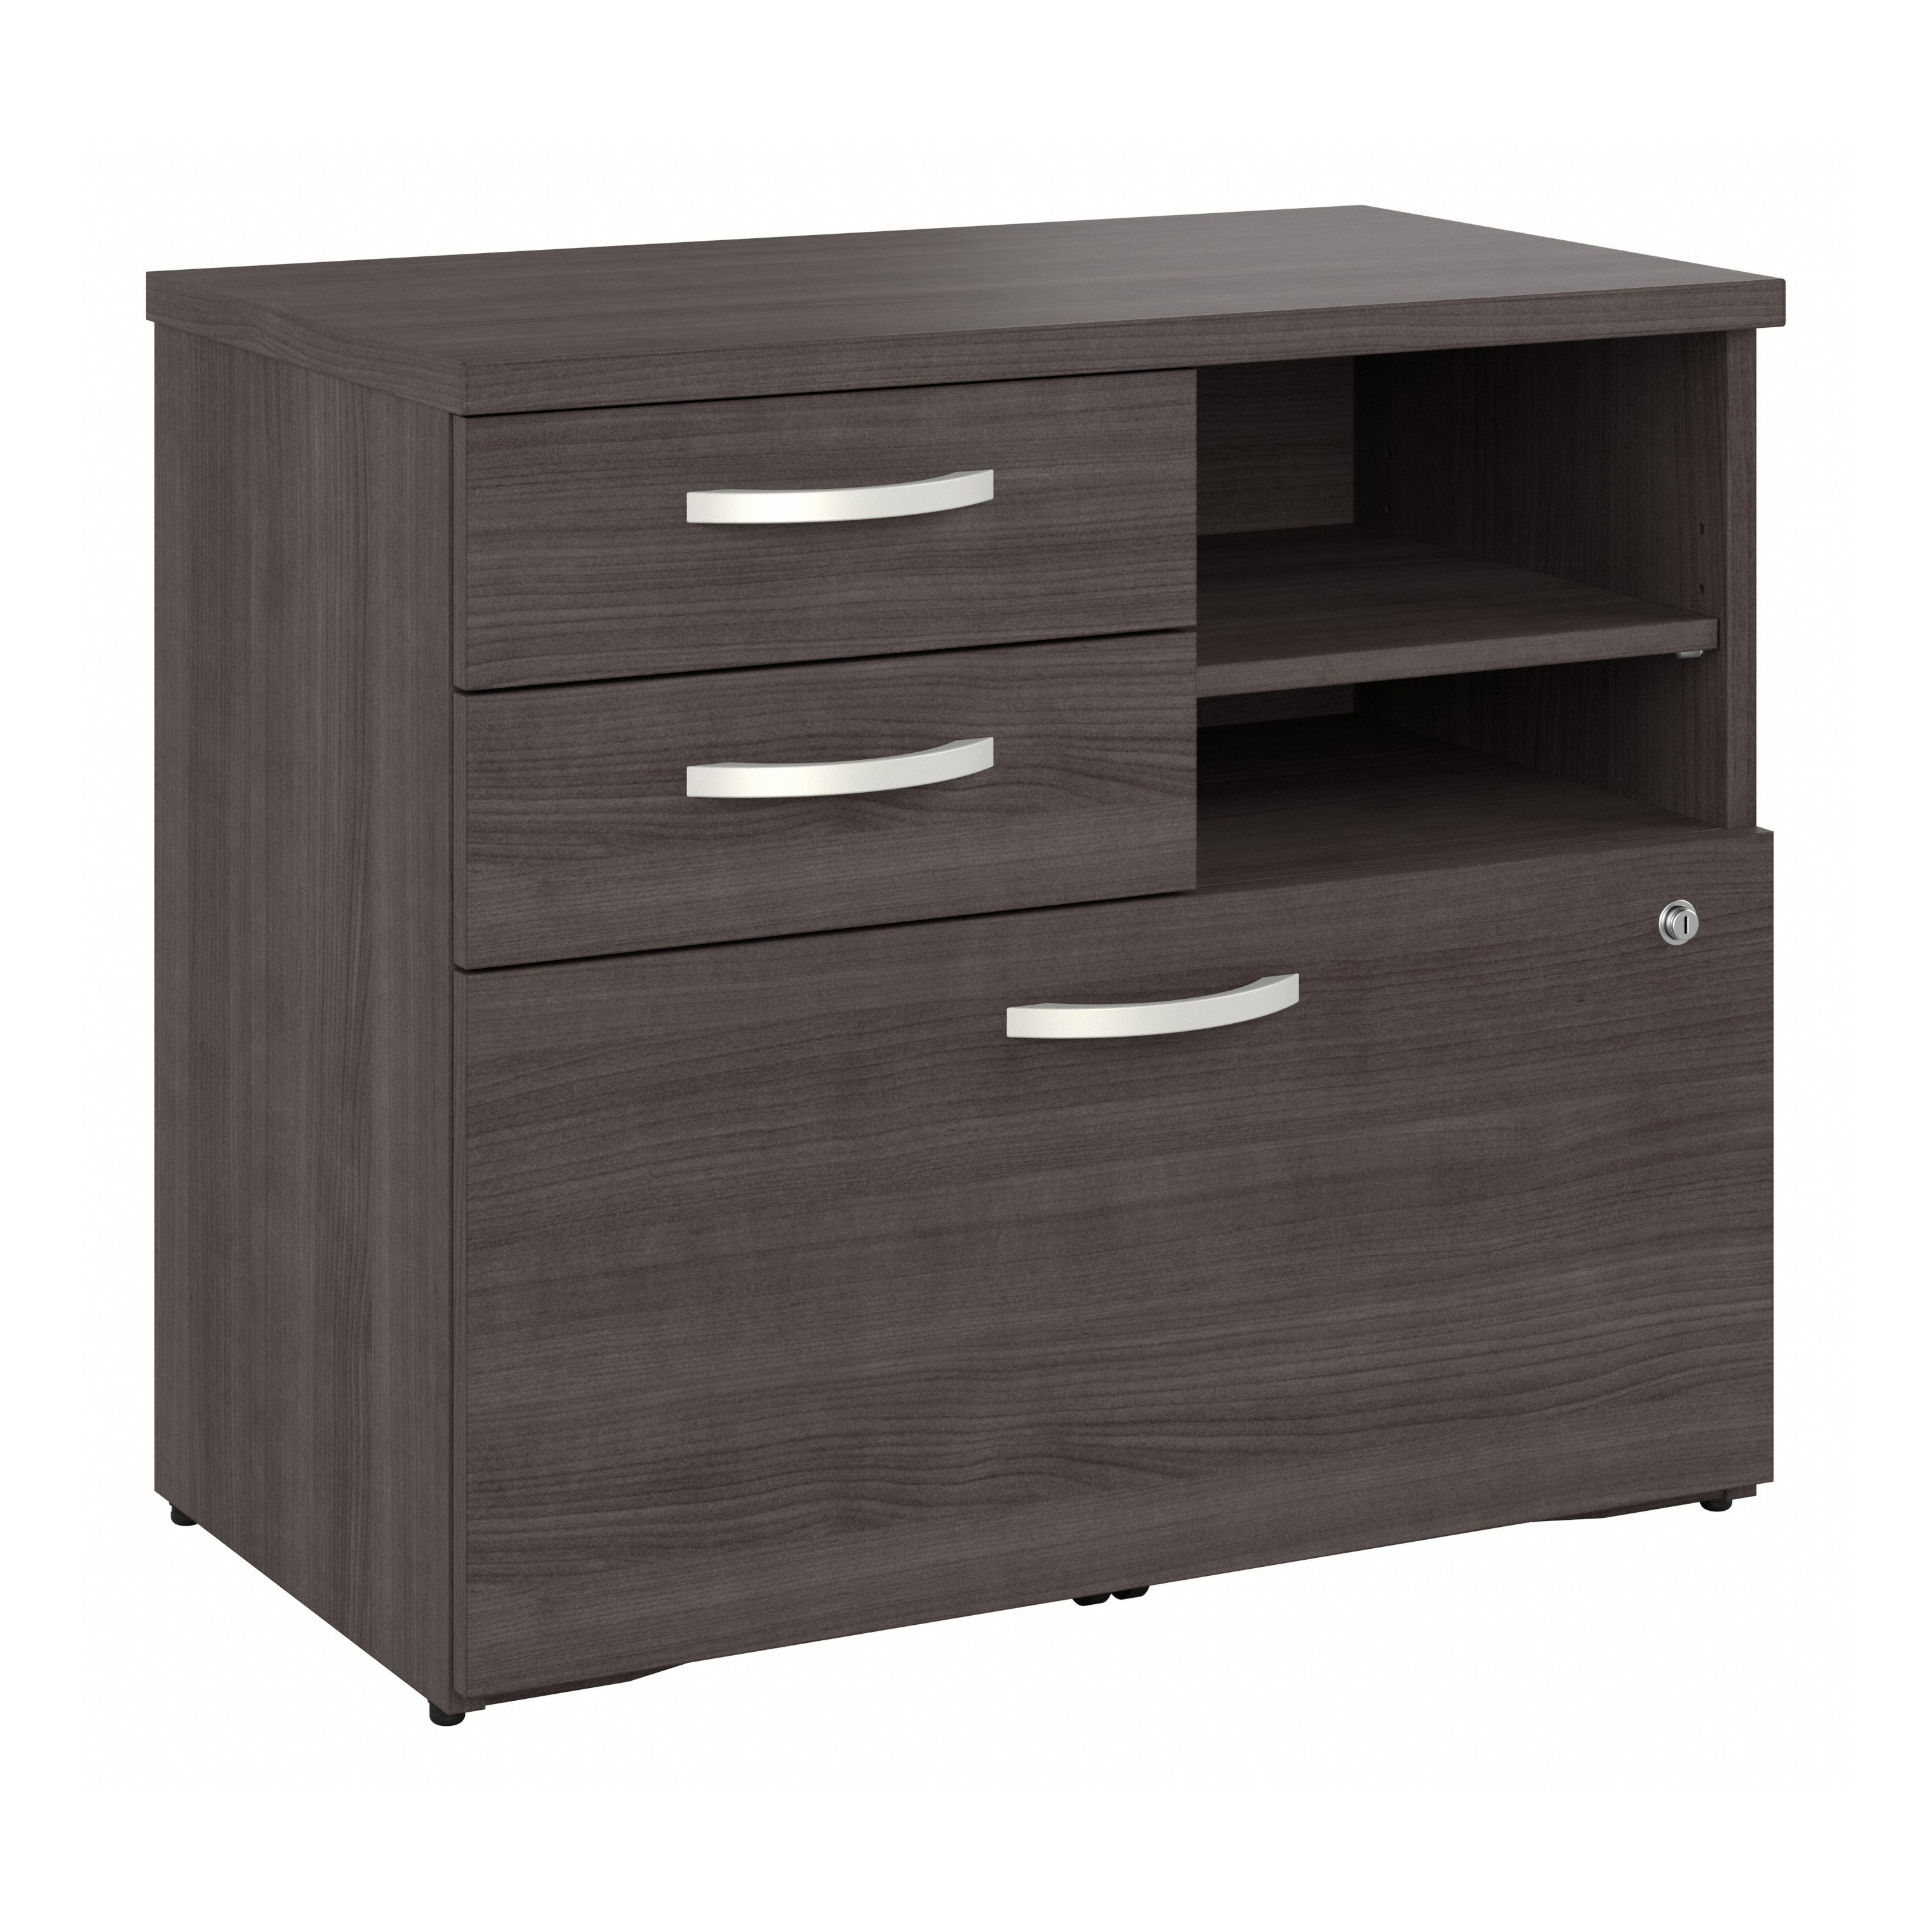 Shop Bush Business Furniture Hybrid Office Storage Cabinet with Drawers and Shelves 02 HYF130SGSU-Z #color_storm gray